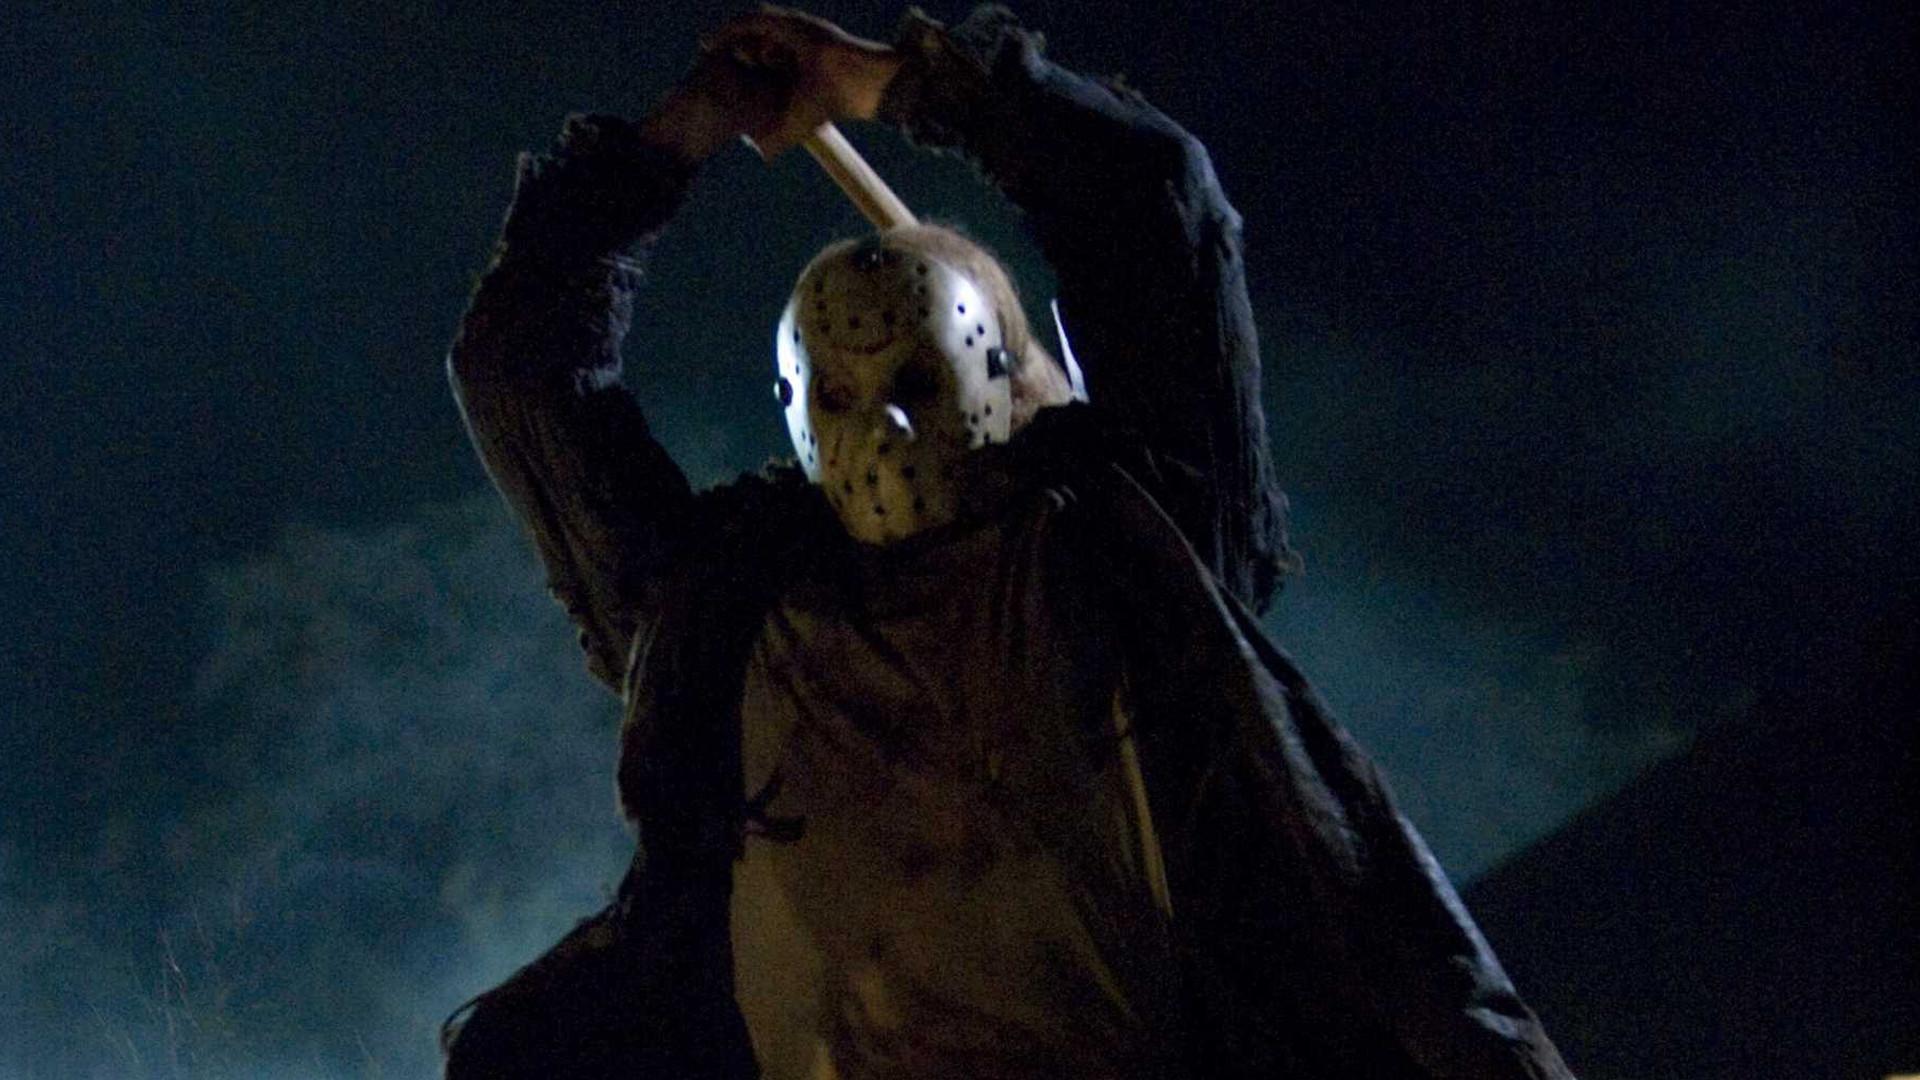 Friday The 13th Wallpaper Hd - Friday The 13th 2009 Jason Voorhees , HD Wallpaper & Backgrounds